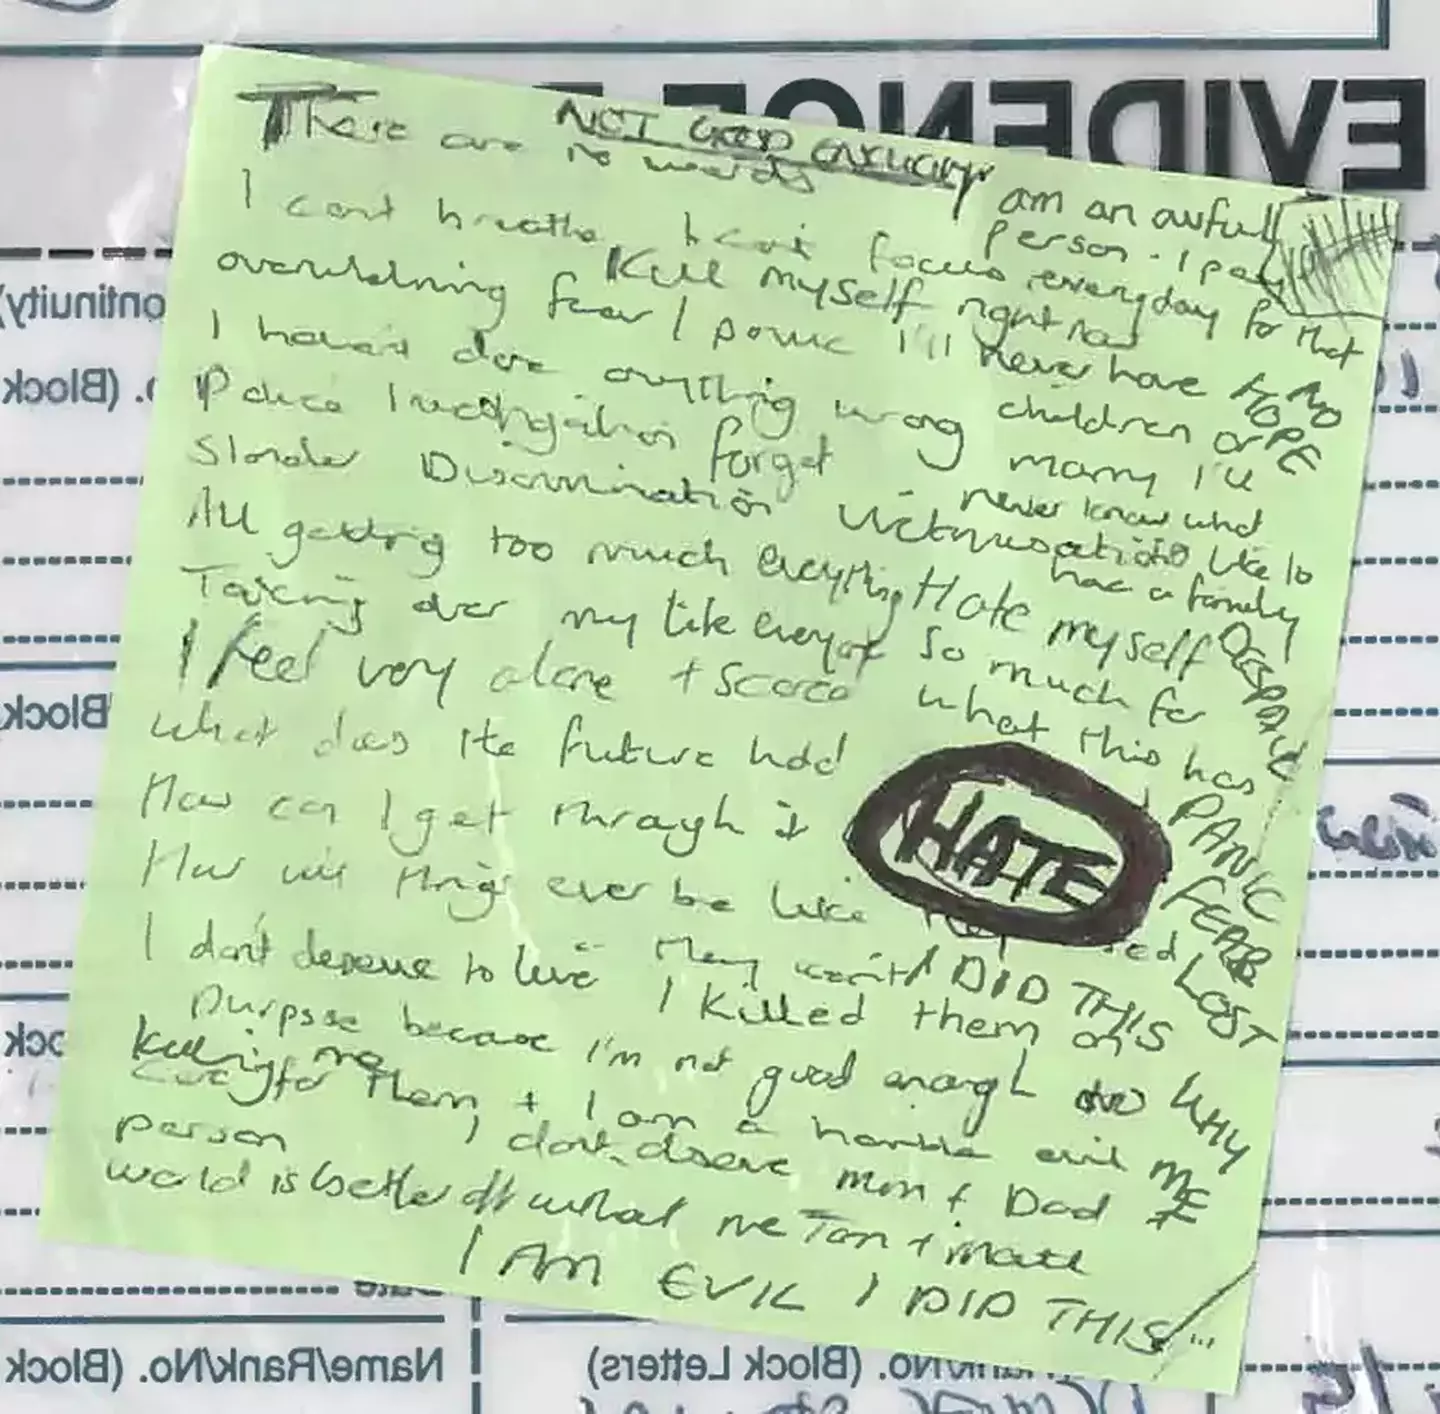 A post-it note written by Lucy Letby and shown to the court at her trial.